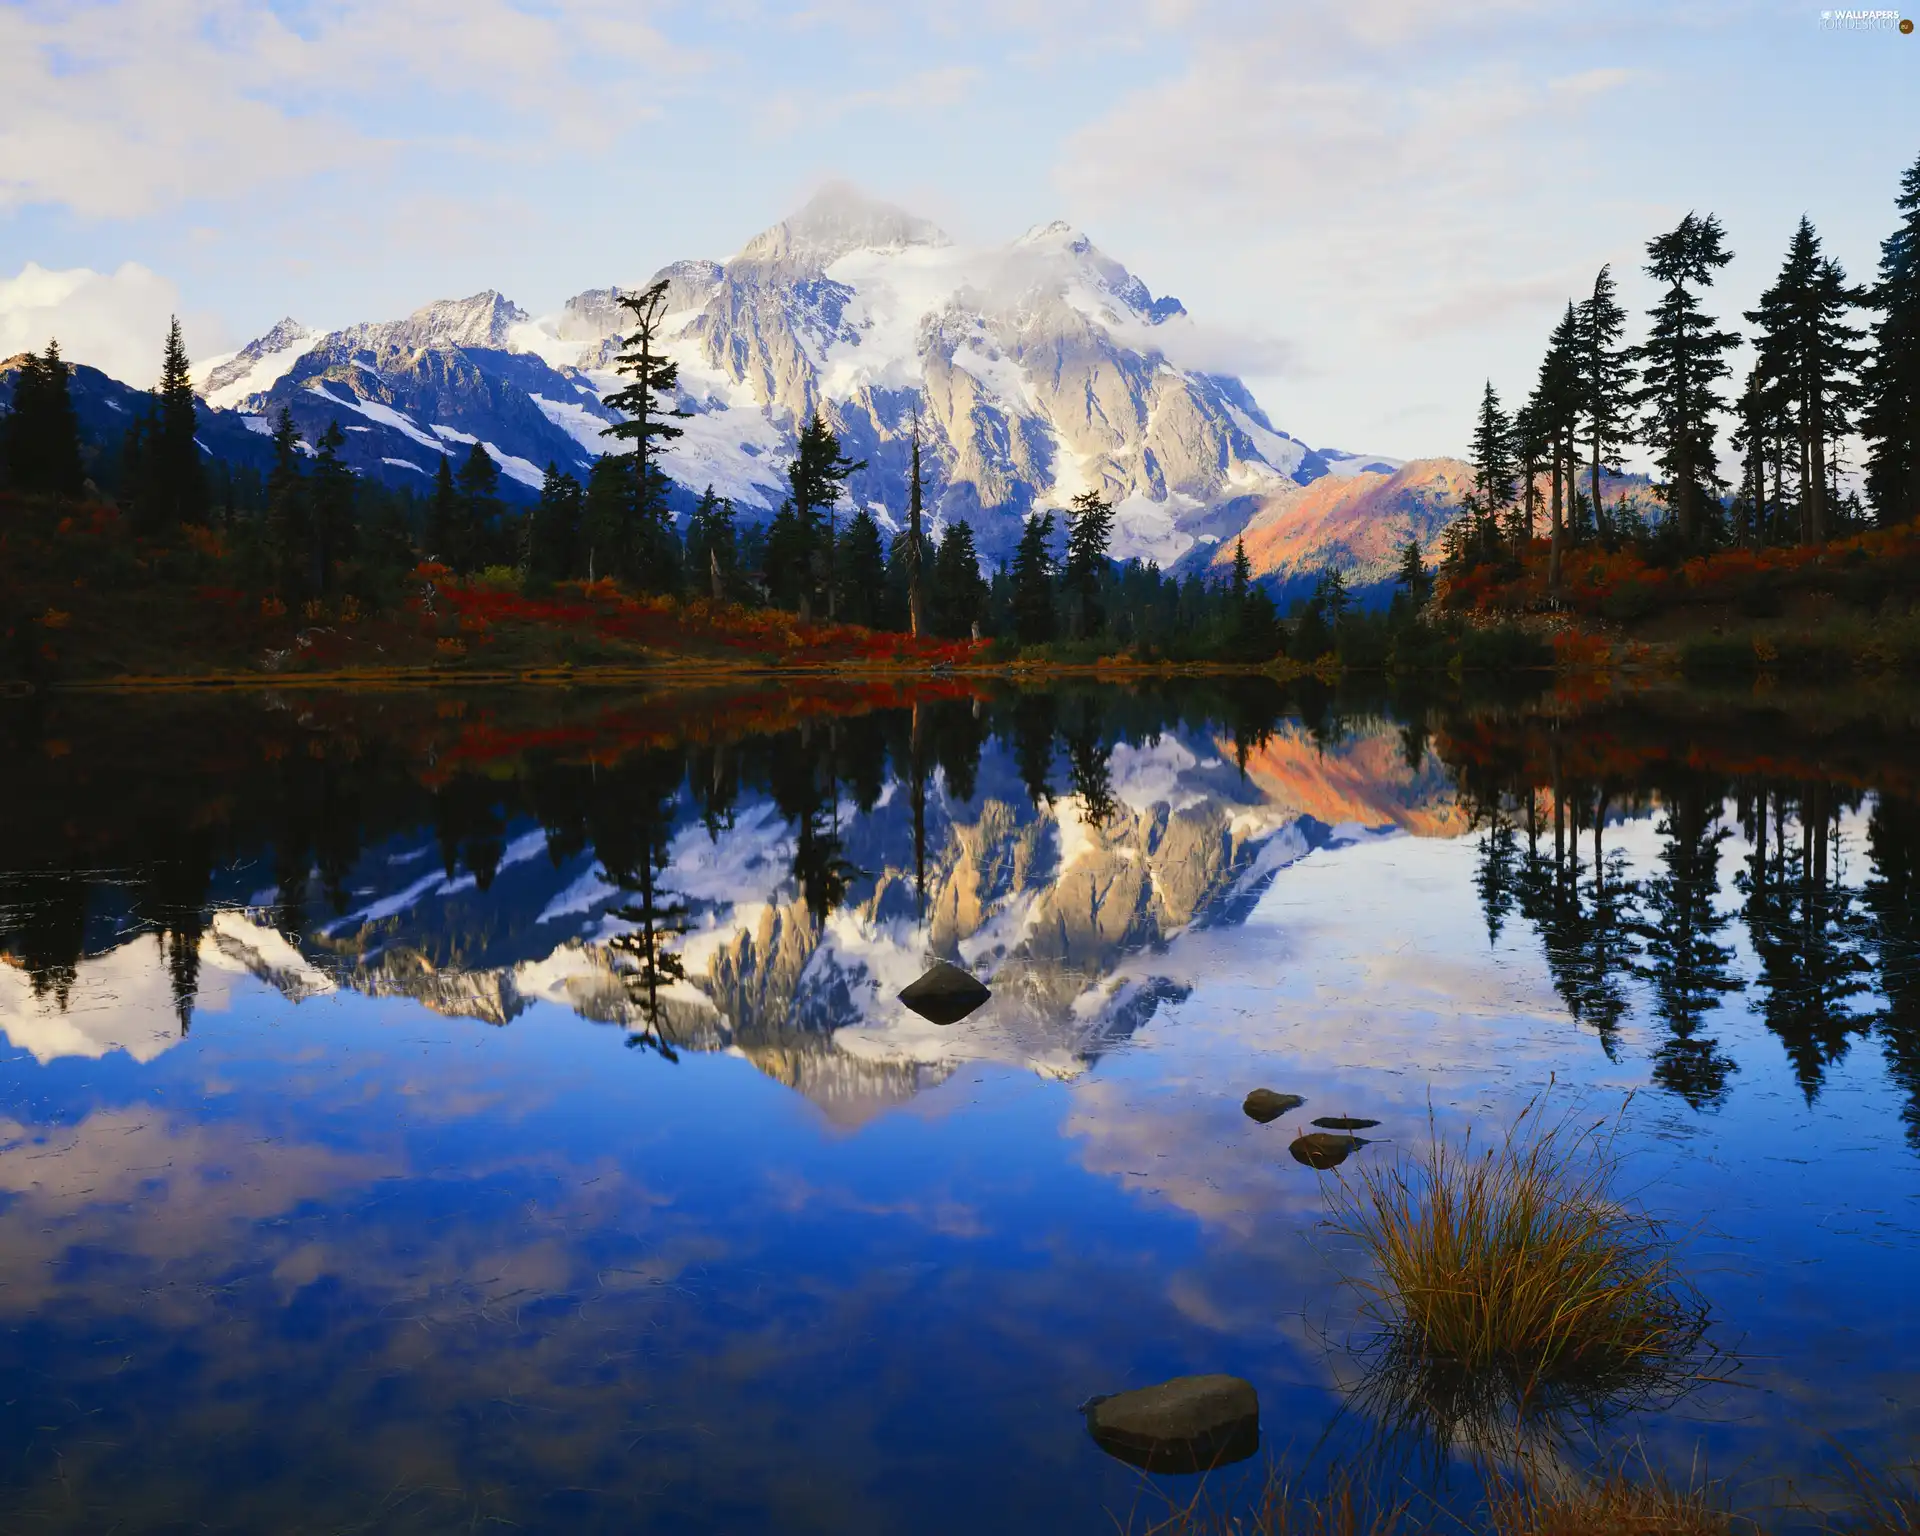 Mountains, lake, reflection, forest